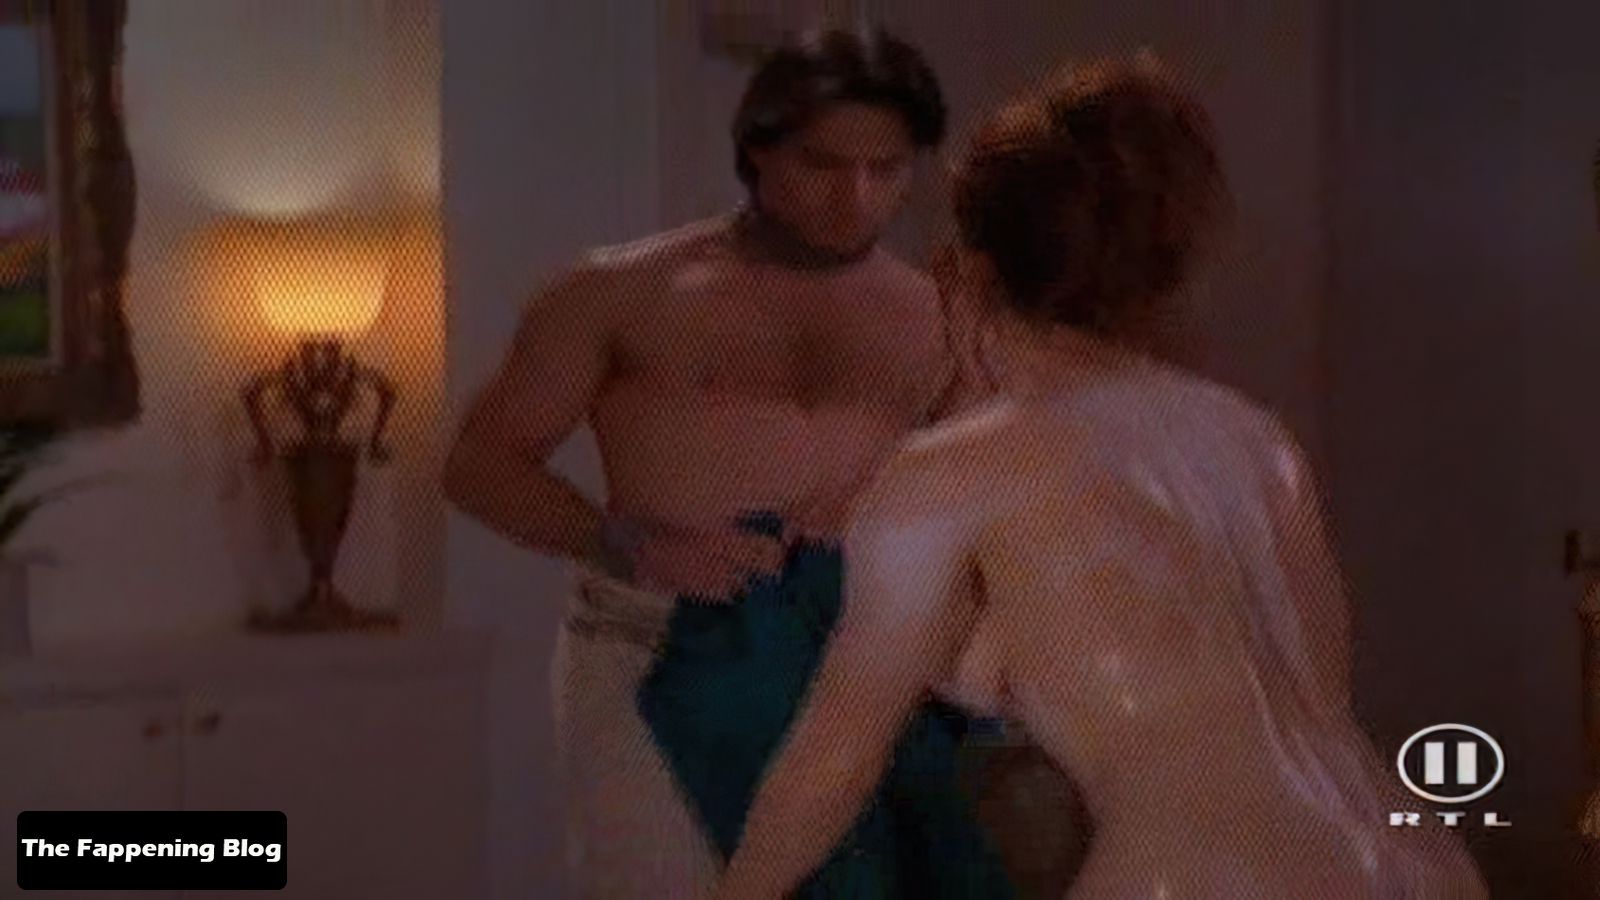 Dana-Delany-Nude-Collection-12-thefappeningblog.com_.jpg